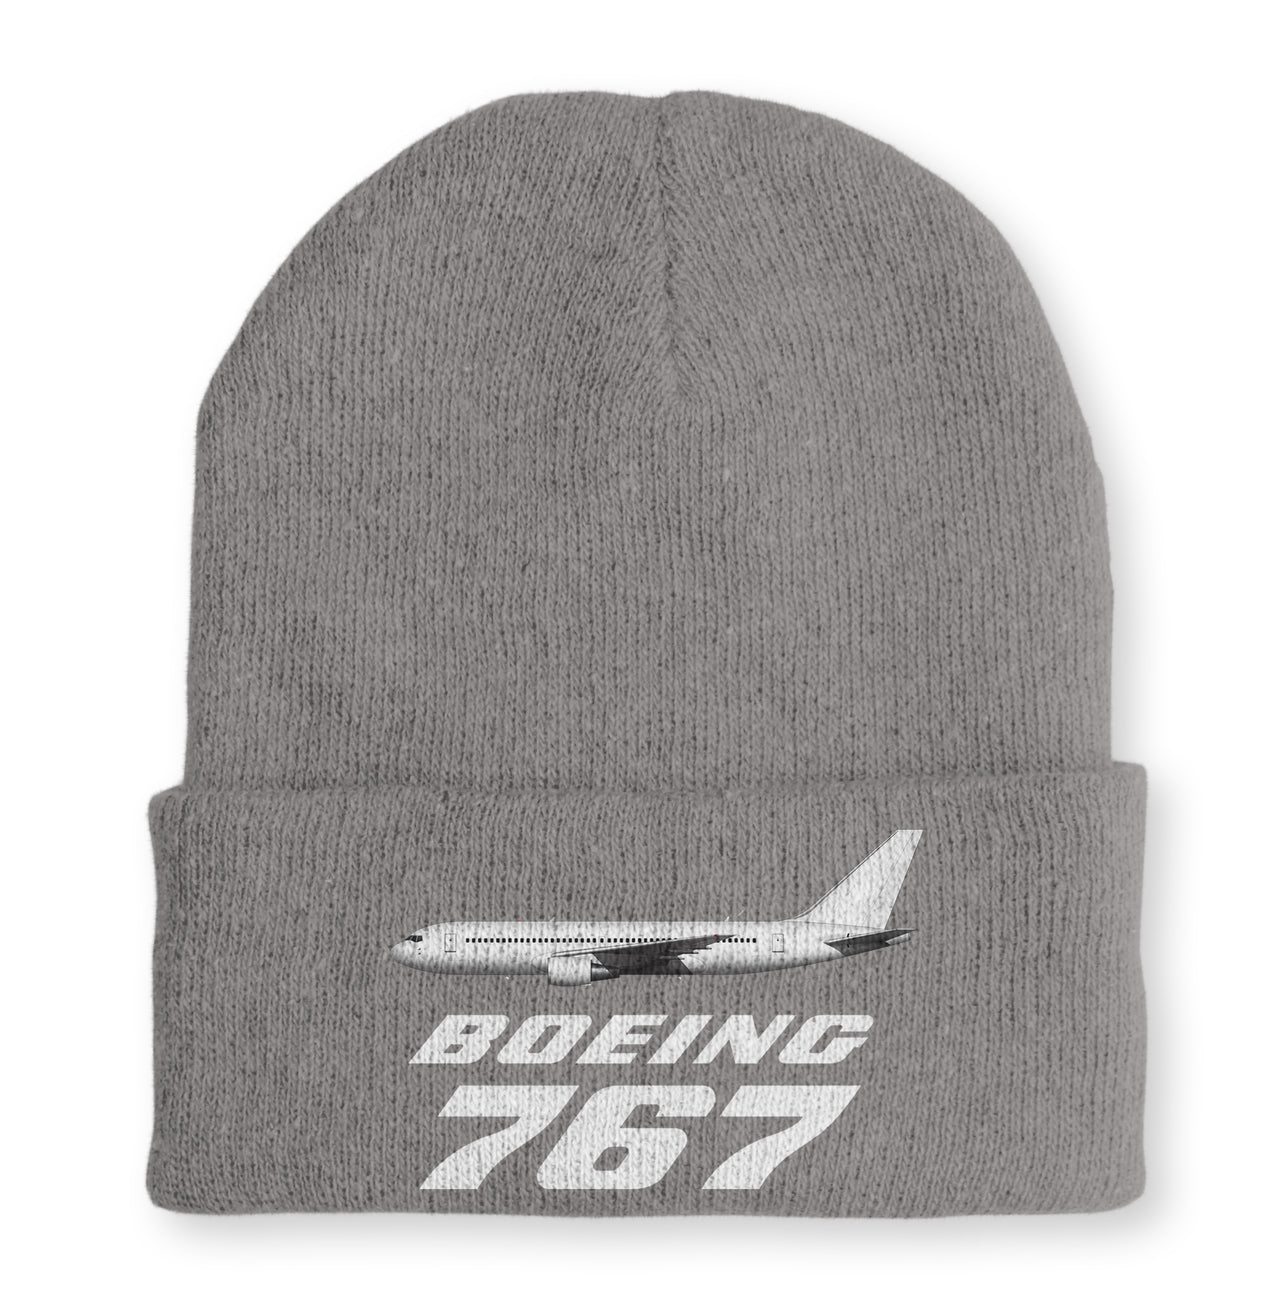 The Boeing 767 Embroidered Beanies